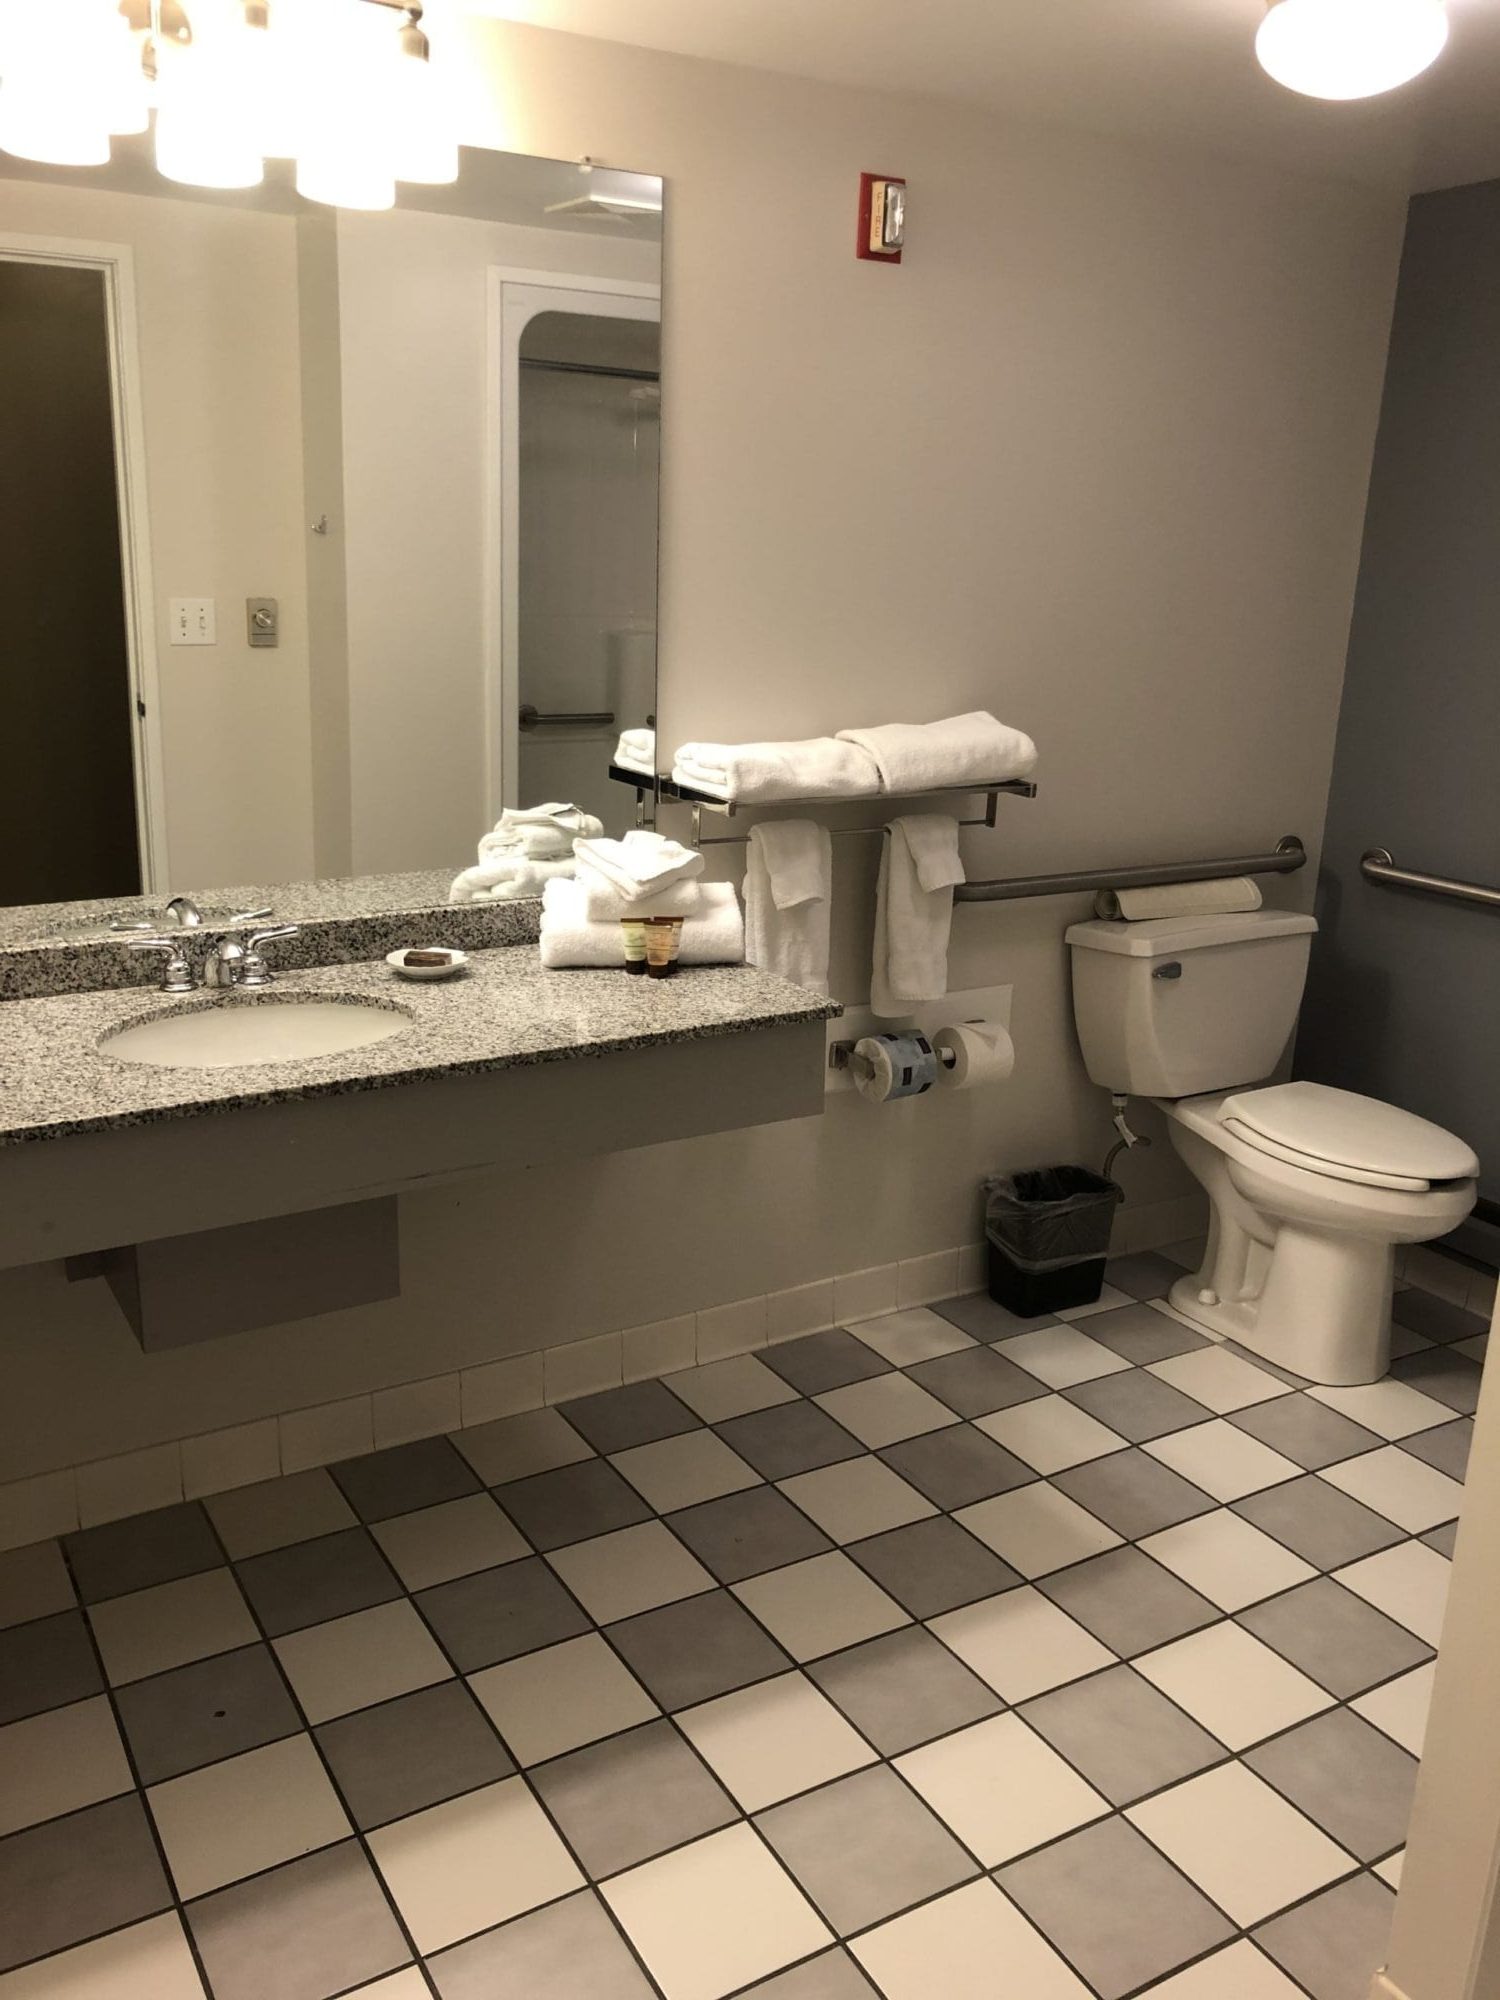 Photo of the bathroom of the Accessible King room with roll-in shower at the Acadia Inn.